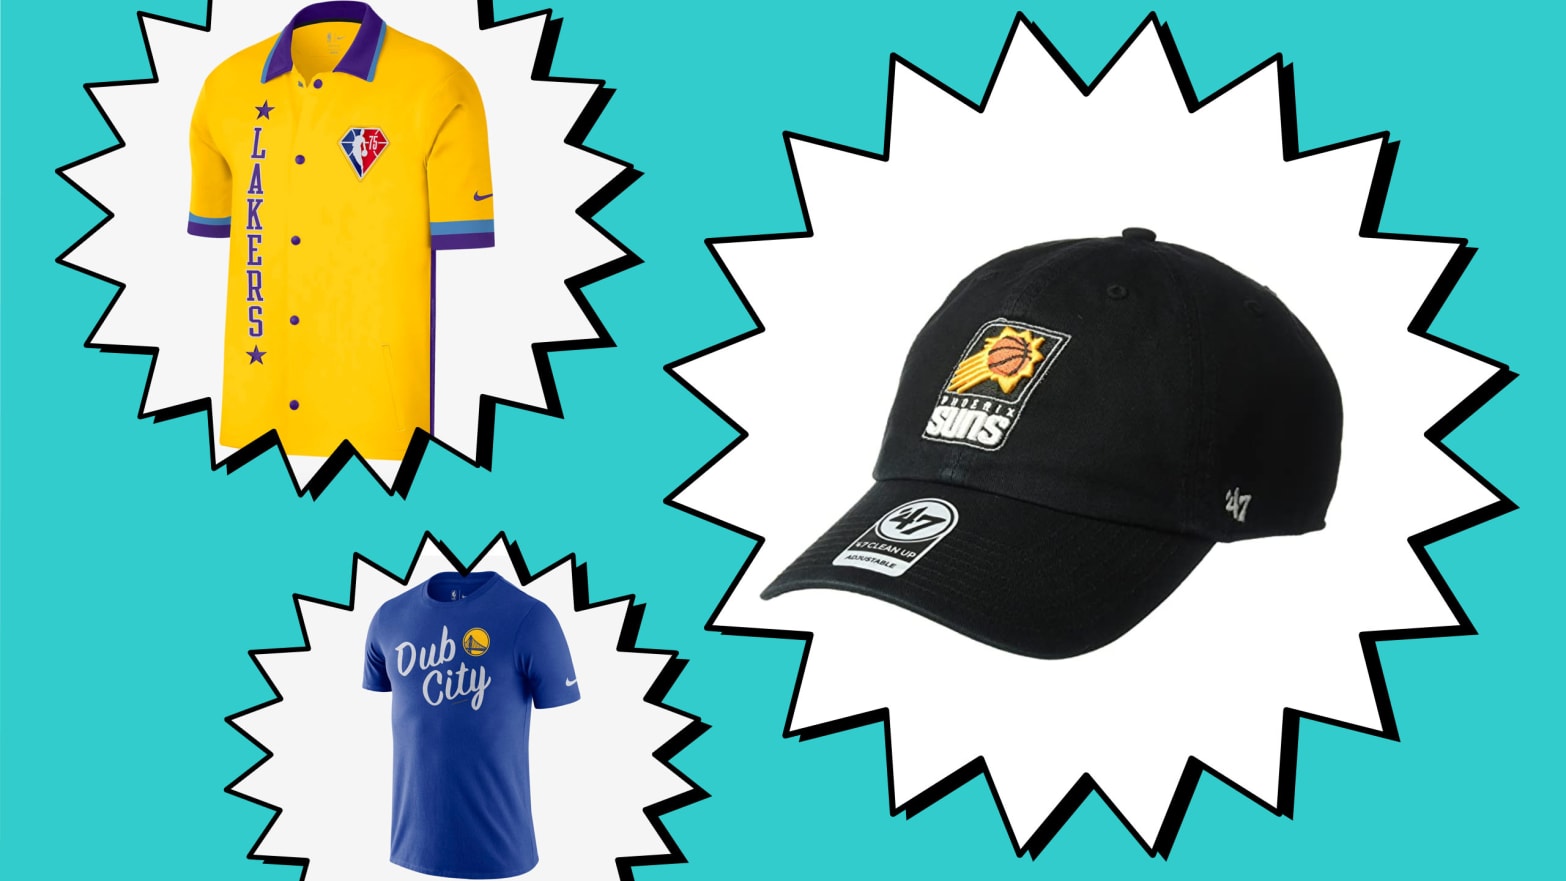 Phoenix Suns NBA Finals shirts, hats: How to shop for Western Conference championship  gear 